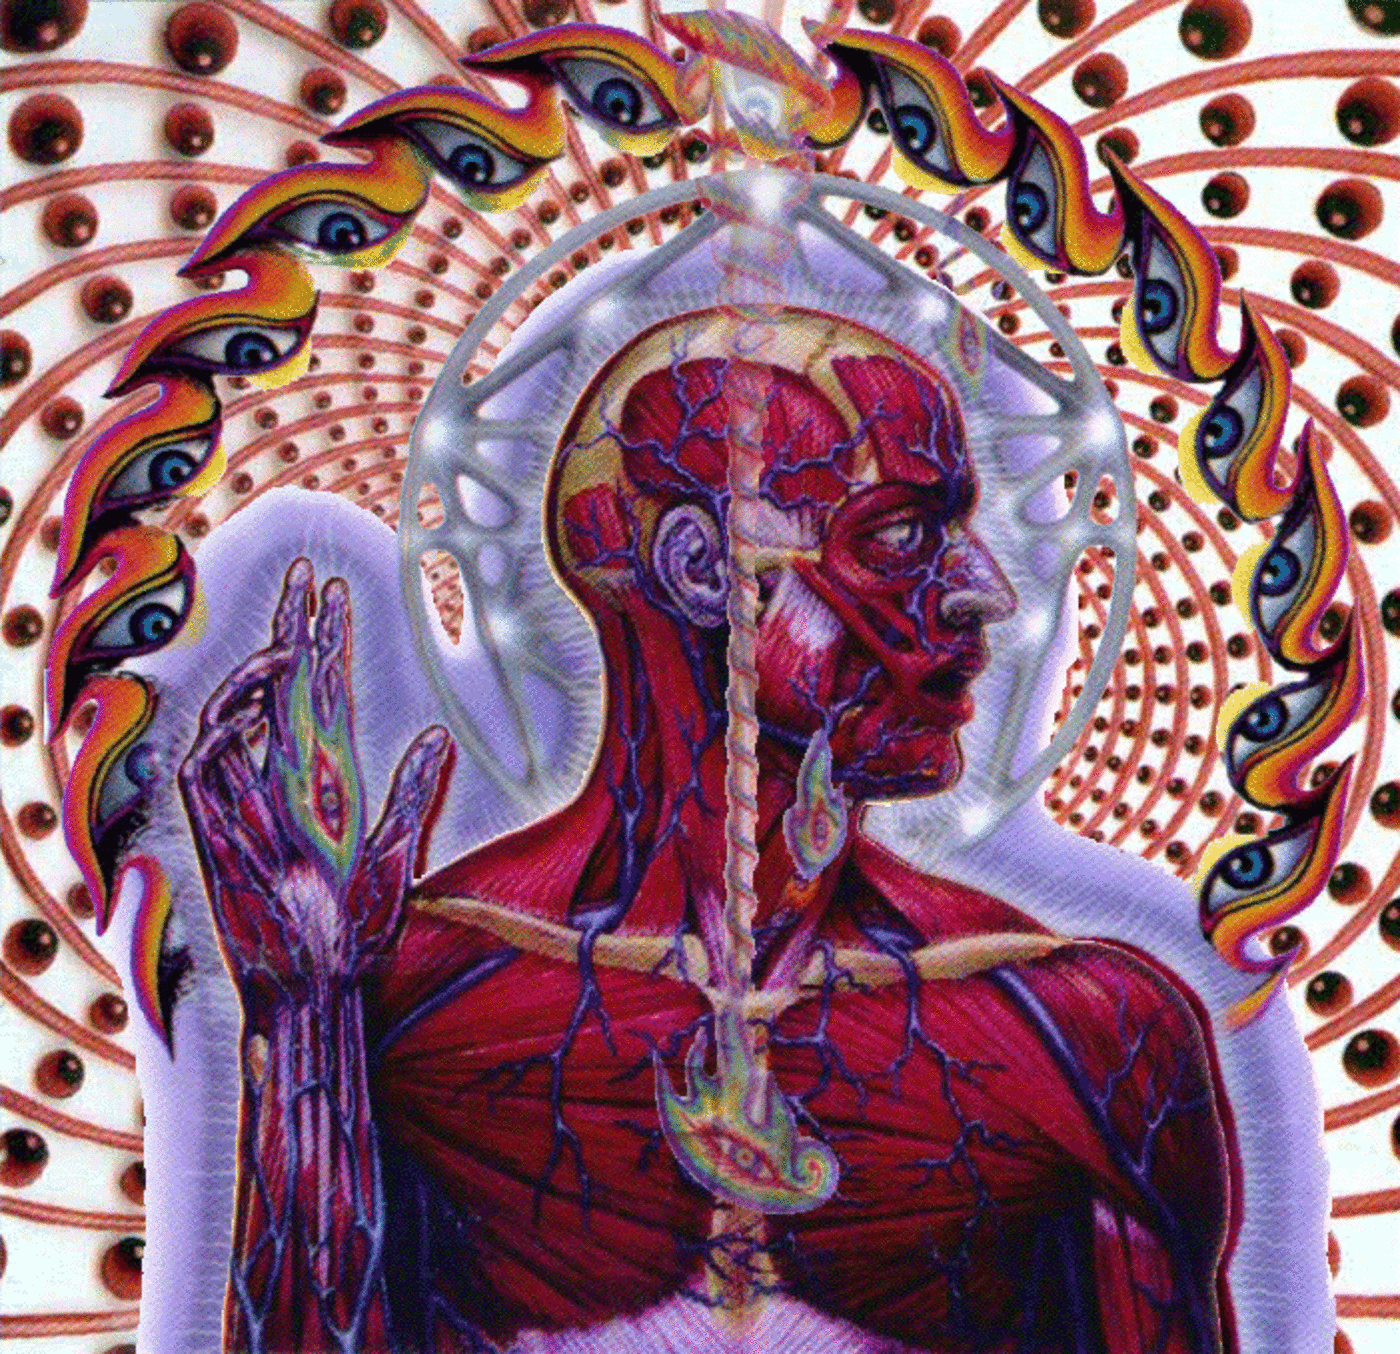 Tool art. Lateralus. Tool обложки. Tool "Lateralus (2lp)". Lateralus layers.